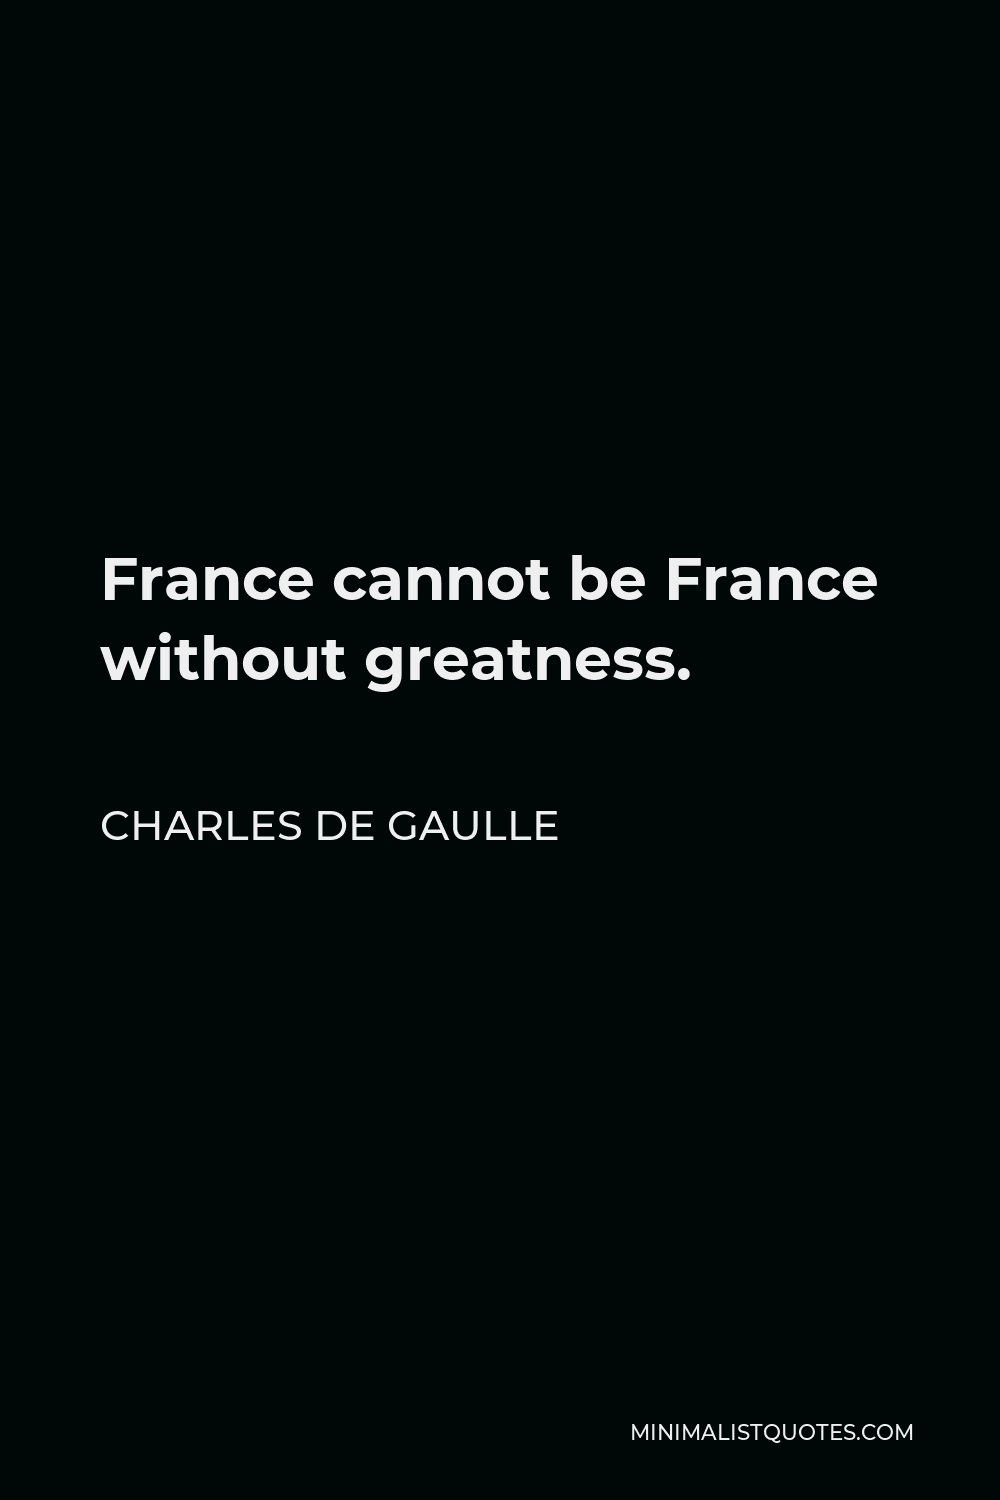 Charles de Gaulle Quote - France cannot be France without greatness.